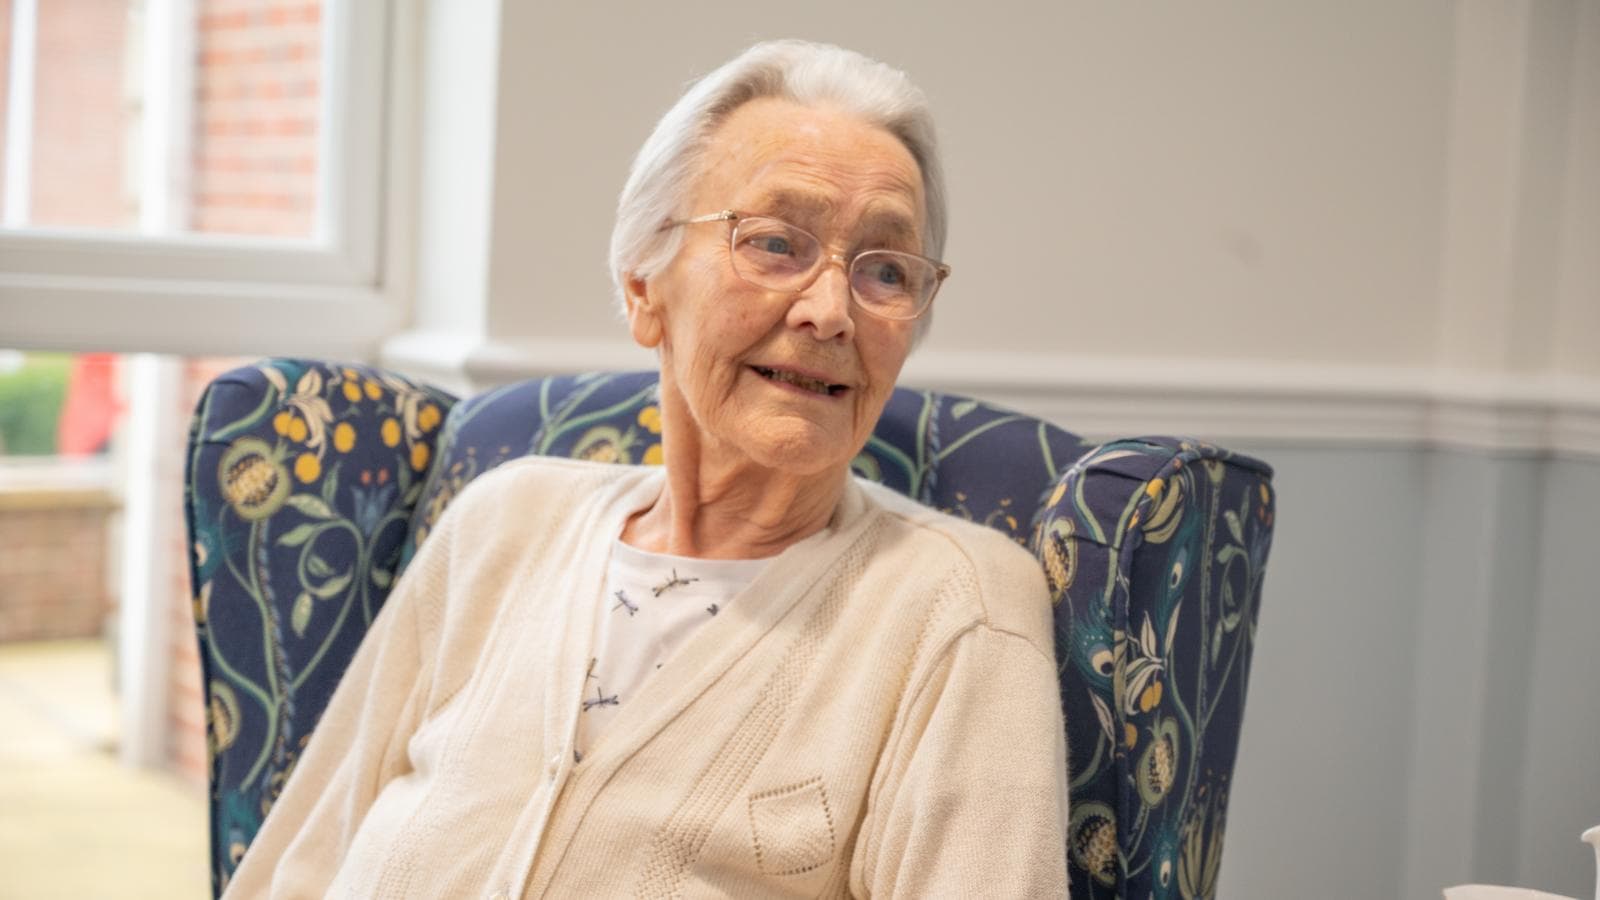 Care home female resident smiling sat in armchair